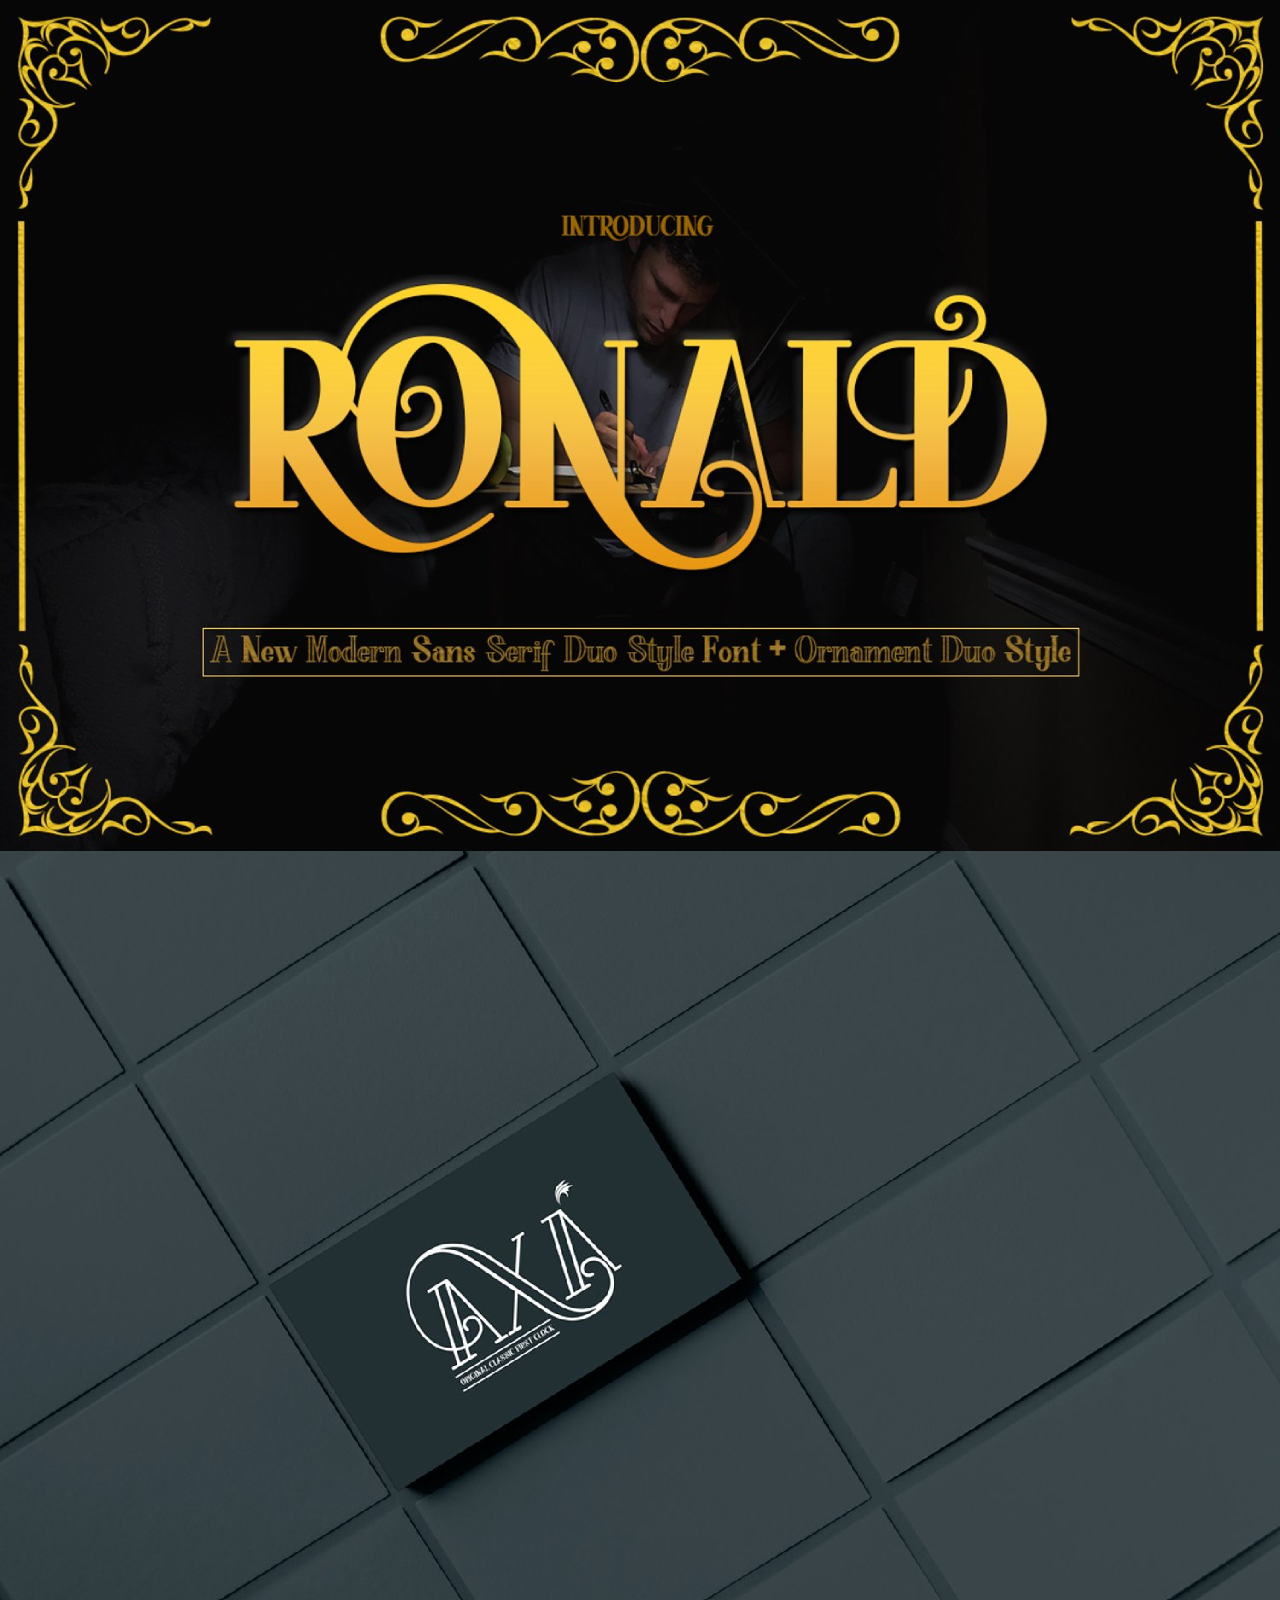 Ronald duo style ornament pinterest image preview.